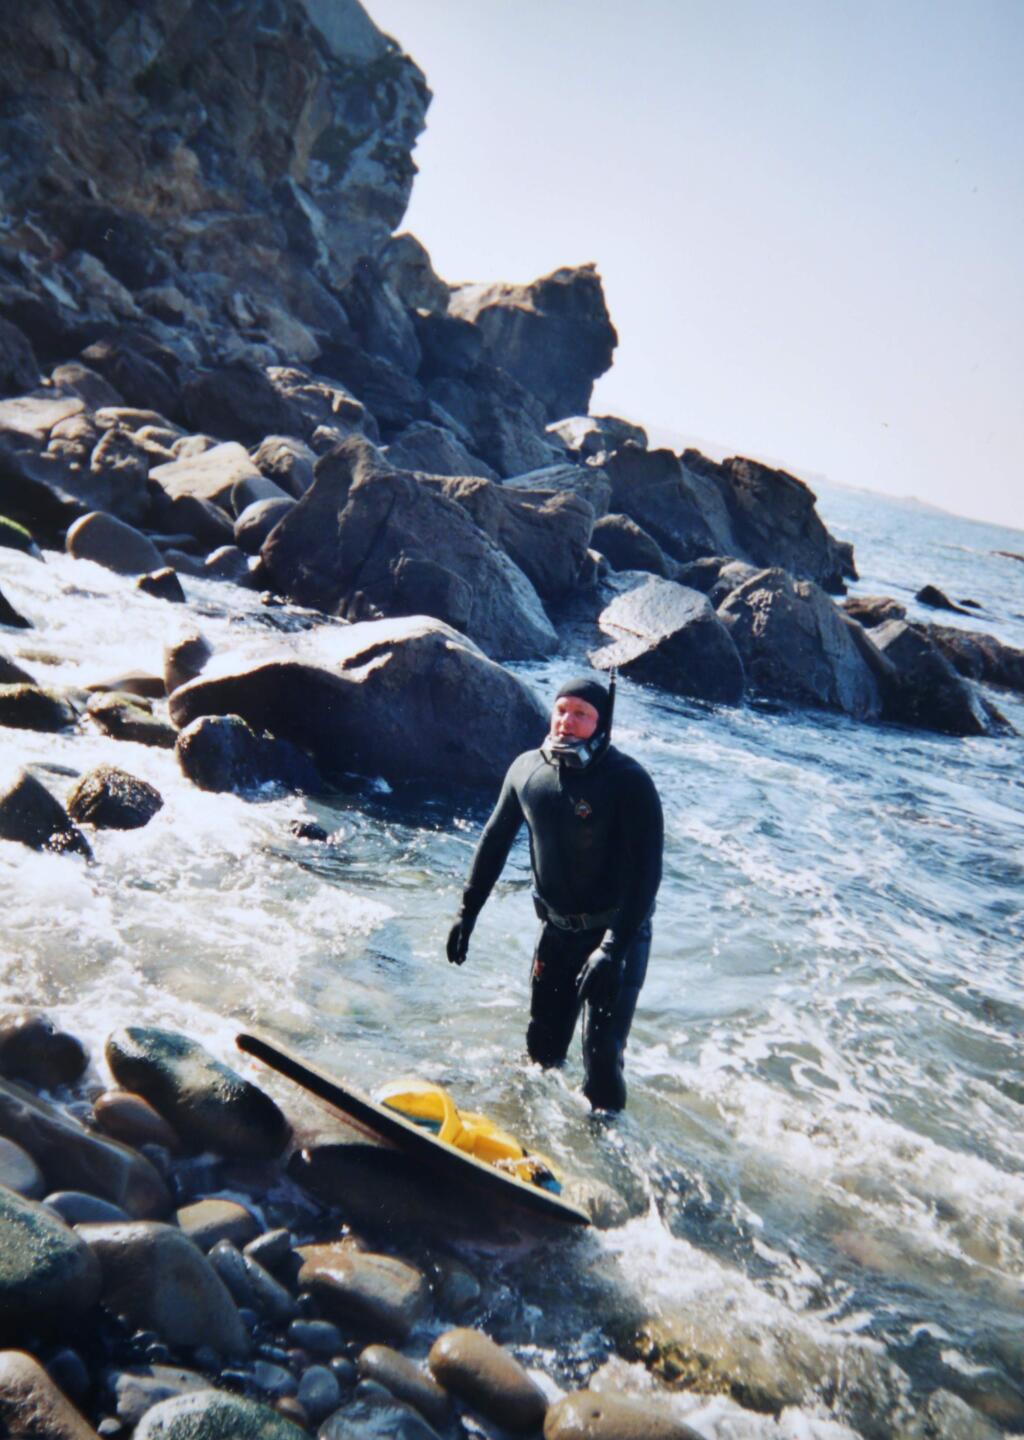 Craig Willes abalone diving at Salt Point Park's Fisk Mill Cove, in a photograph provided by Linda Willes. Craig Willes drowned while abalone diving at the same location in 2013.